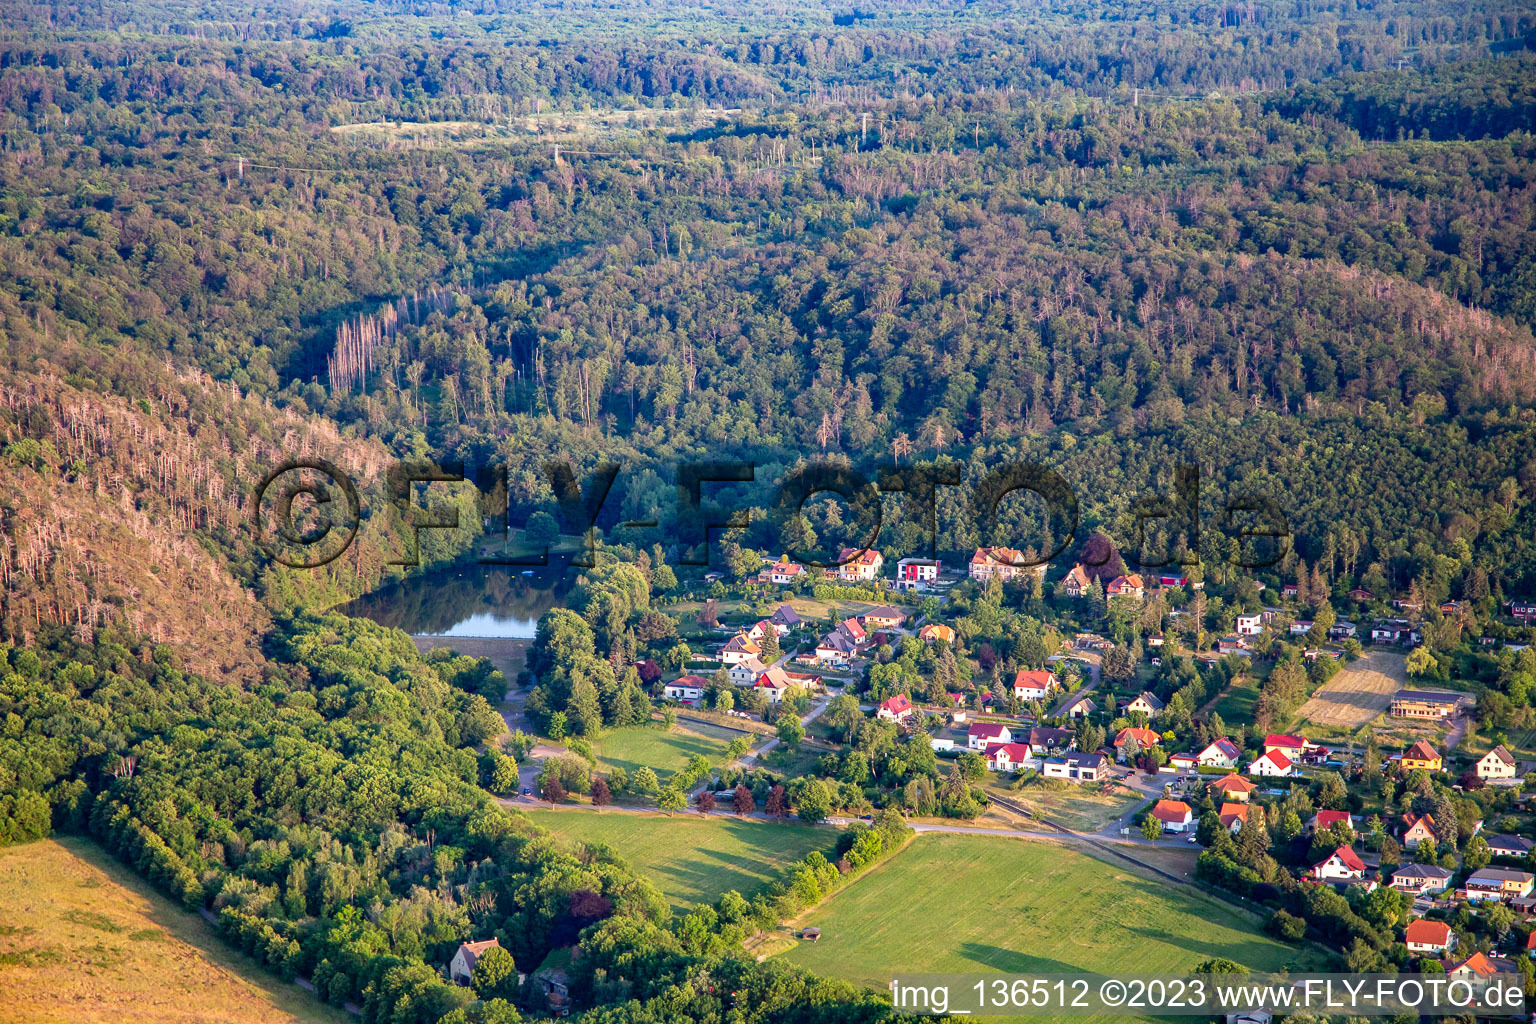 Waldbad Osterteich in the district Gernrode in Quedlinburg in the state Saxony-Anhalt, Germany